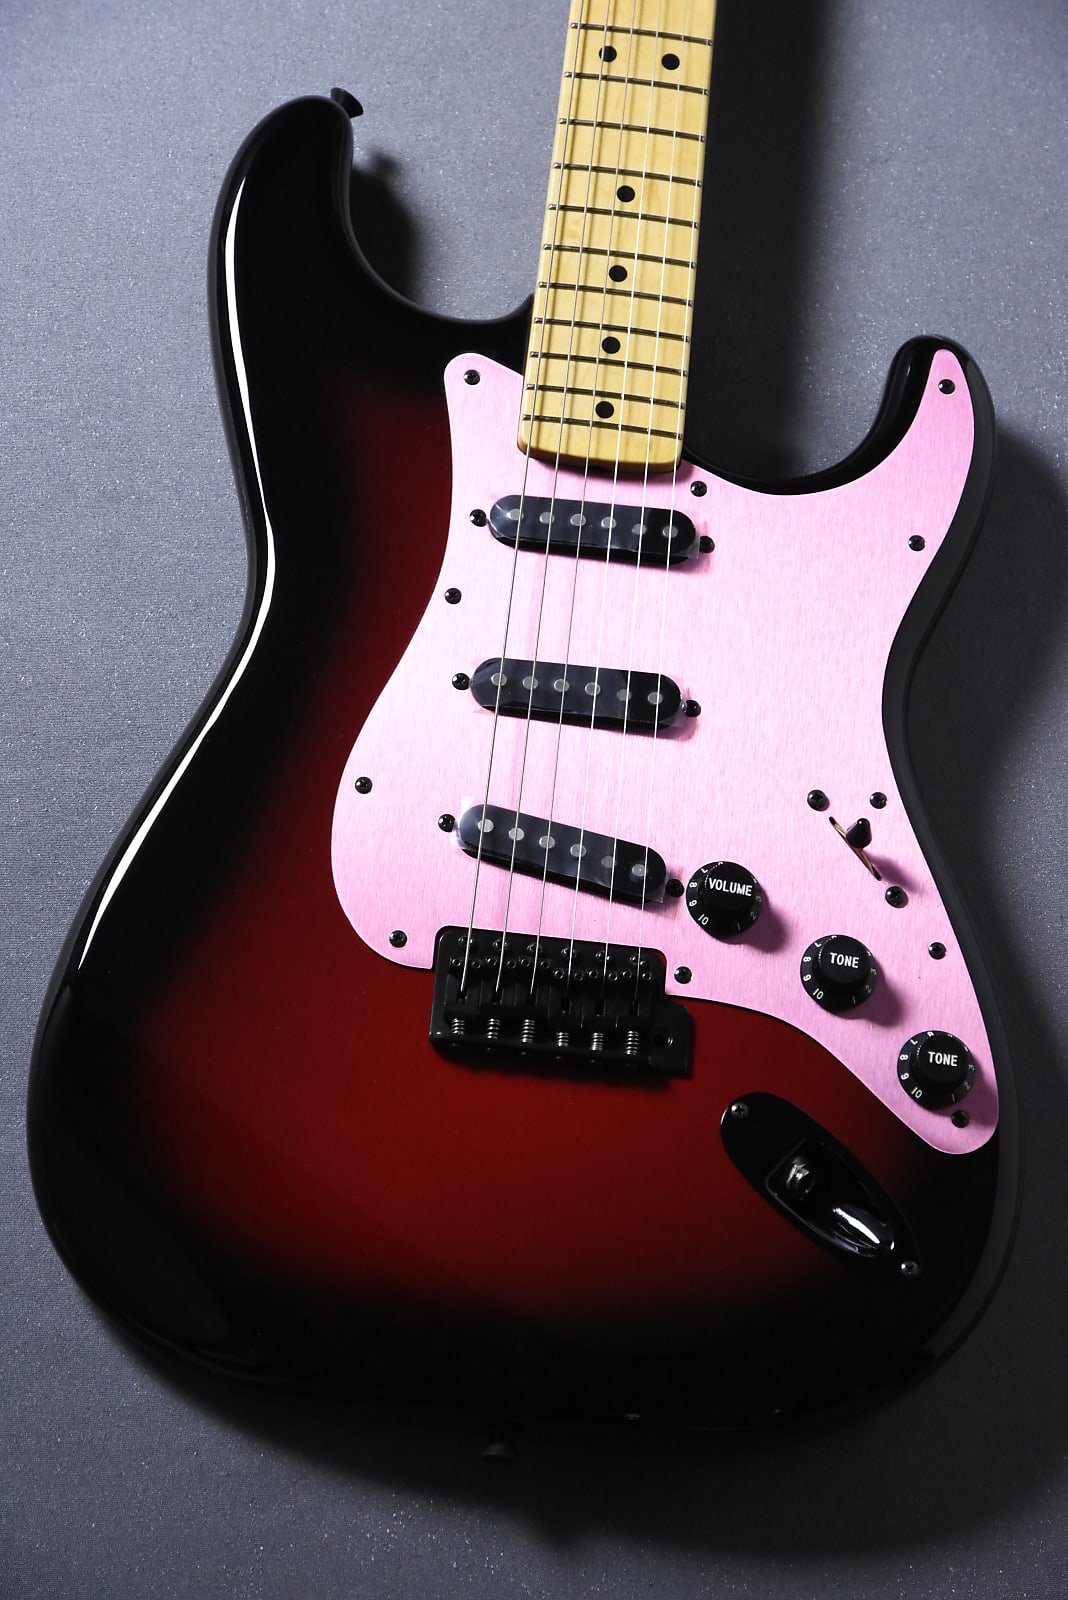 Fender Ken Stratocaster Galaxy Red 2021 エレキギター 楽器/器材 おもちゃ・ホビー・グッズ 安い 直営 店